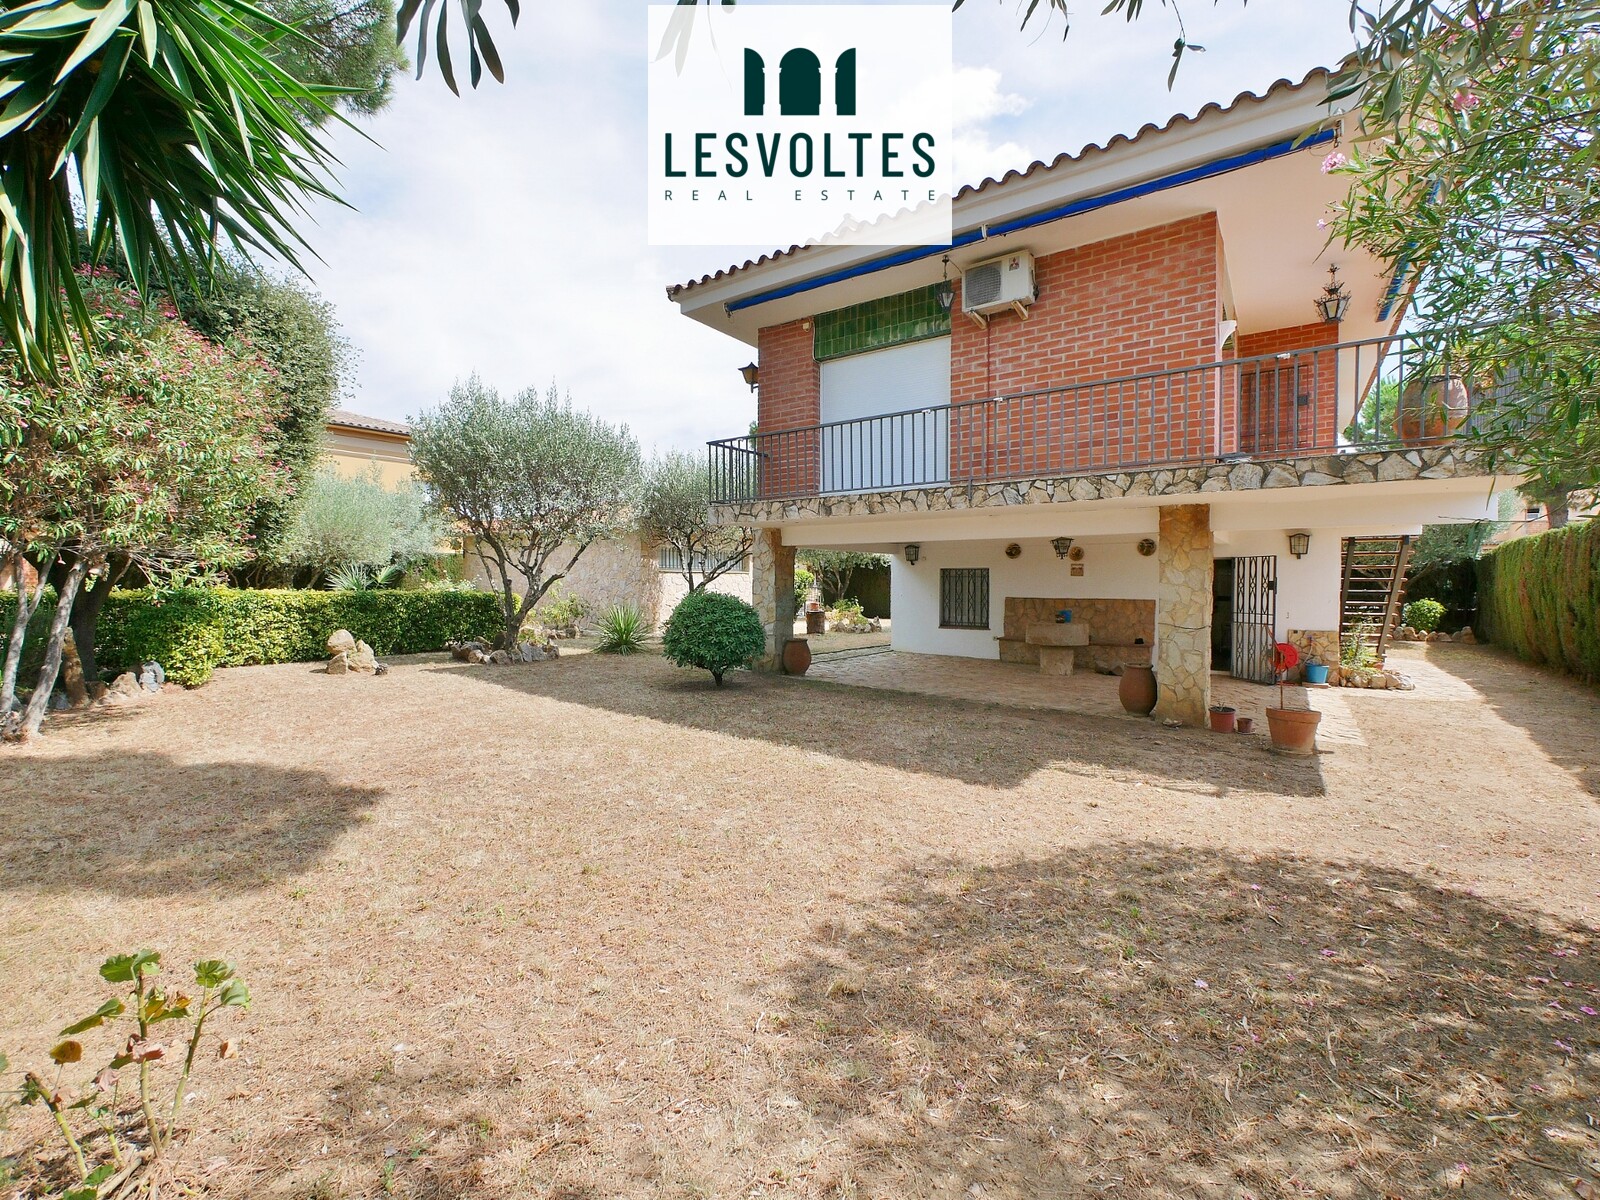 SINGLE FAMILY HOUSE OF 185 M2 WITH INDEPENDENT GARAGE, TERRACE AND GARDEN OF 670 M2 FOR SALE IN LA BISBAL D'EMPORDÀ.